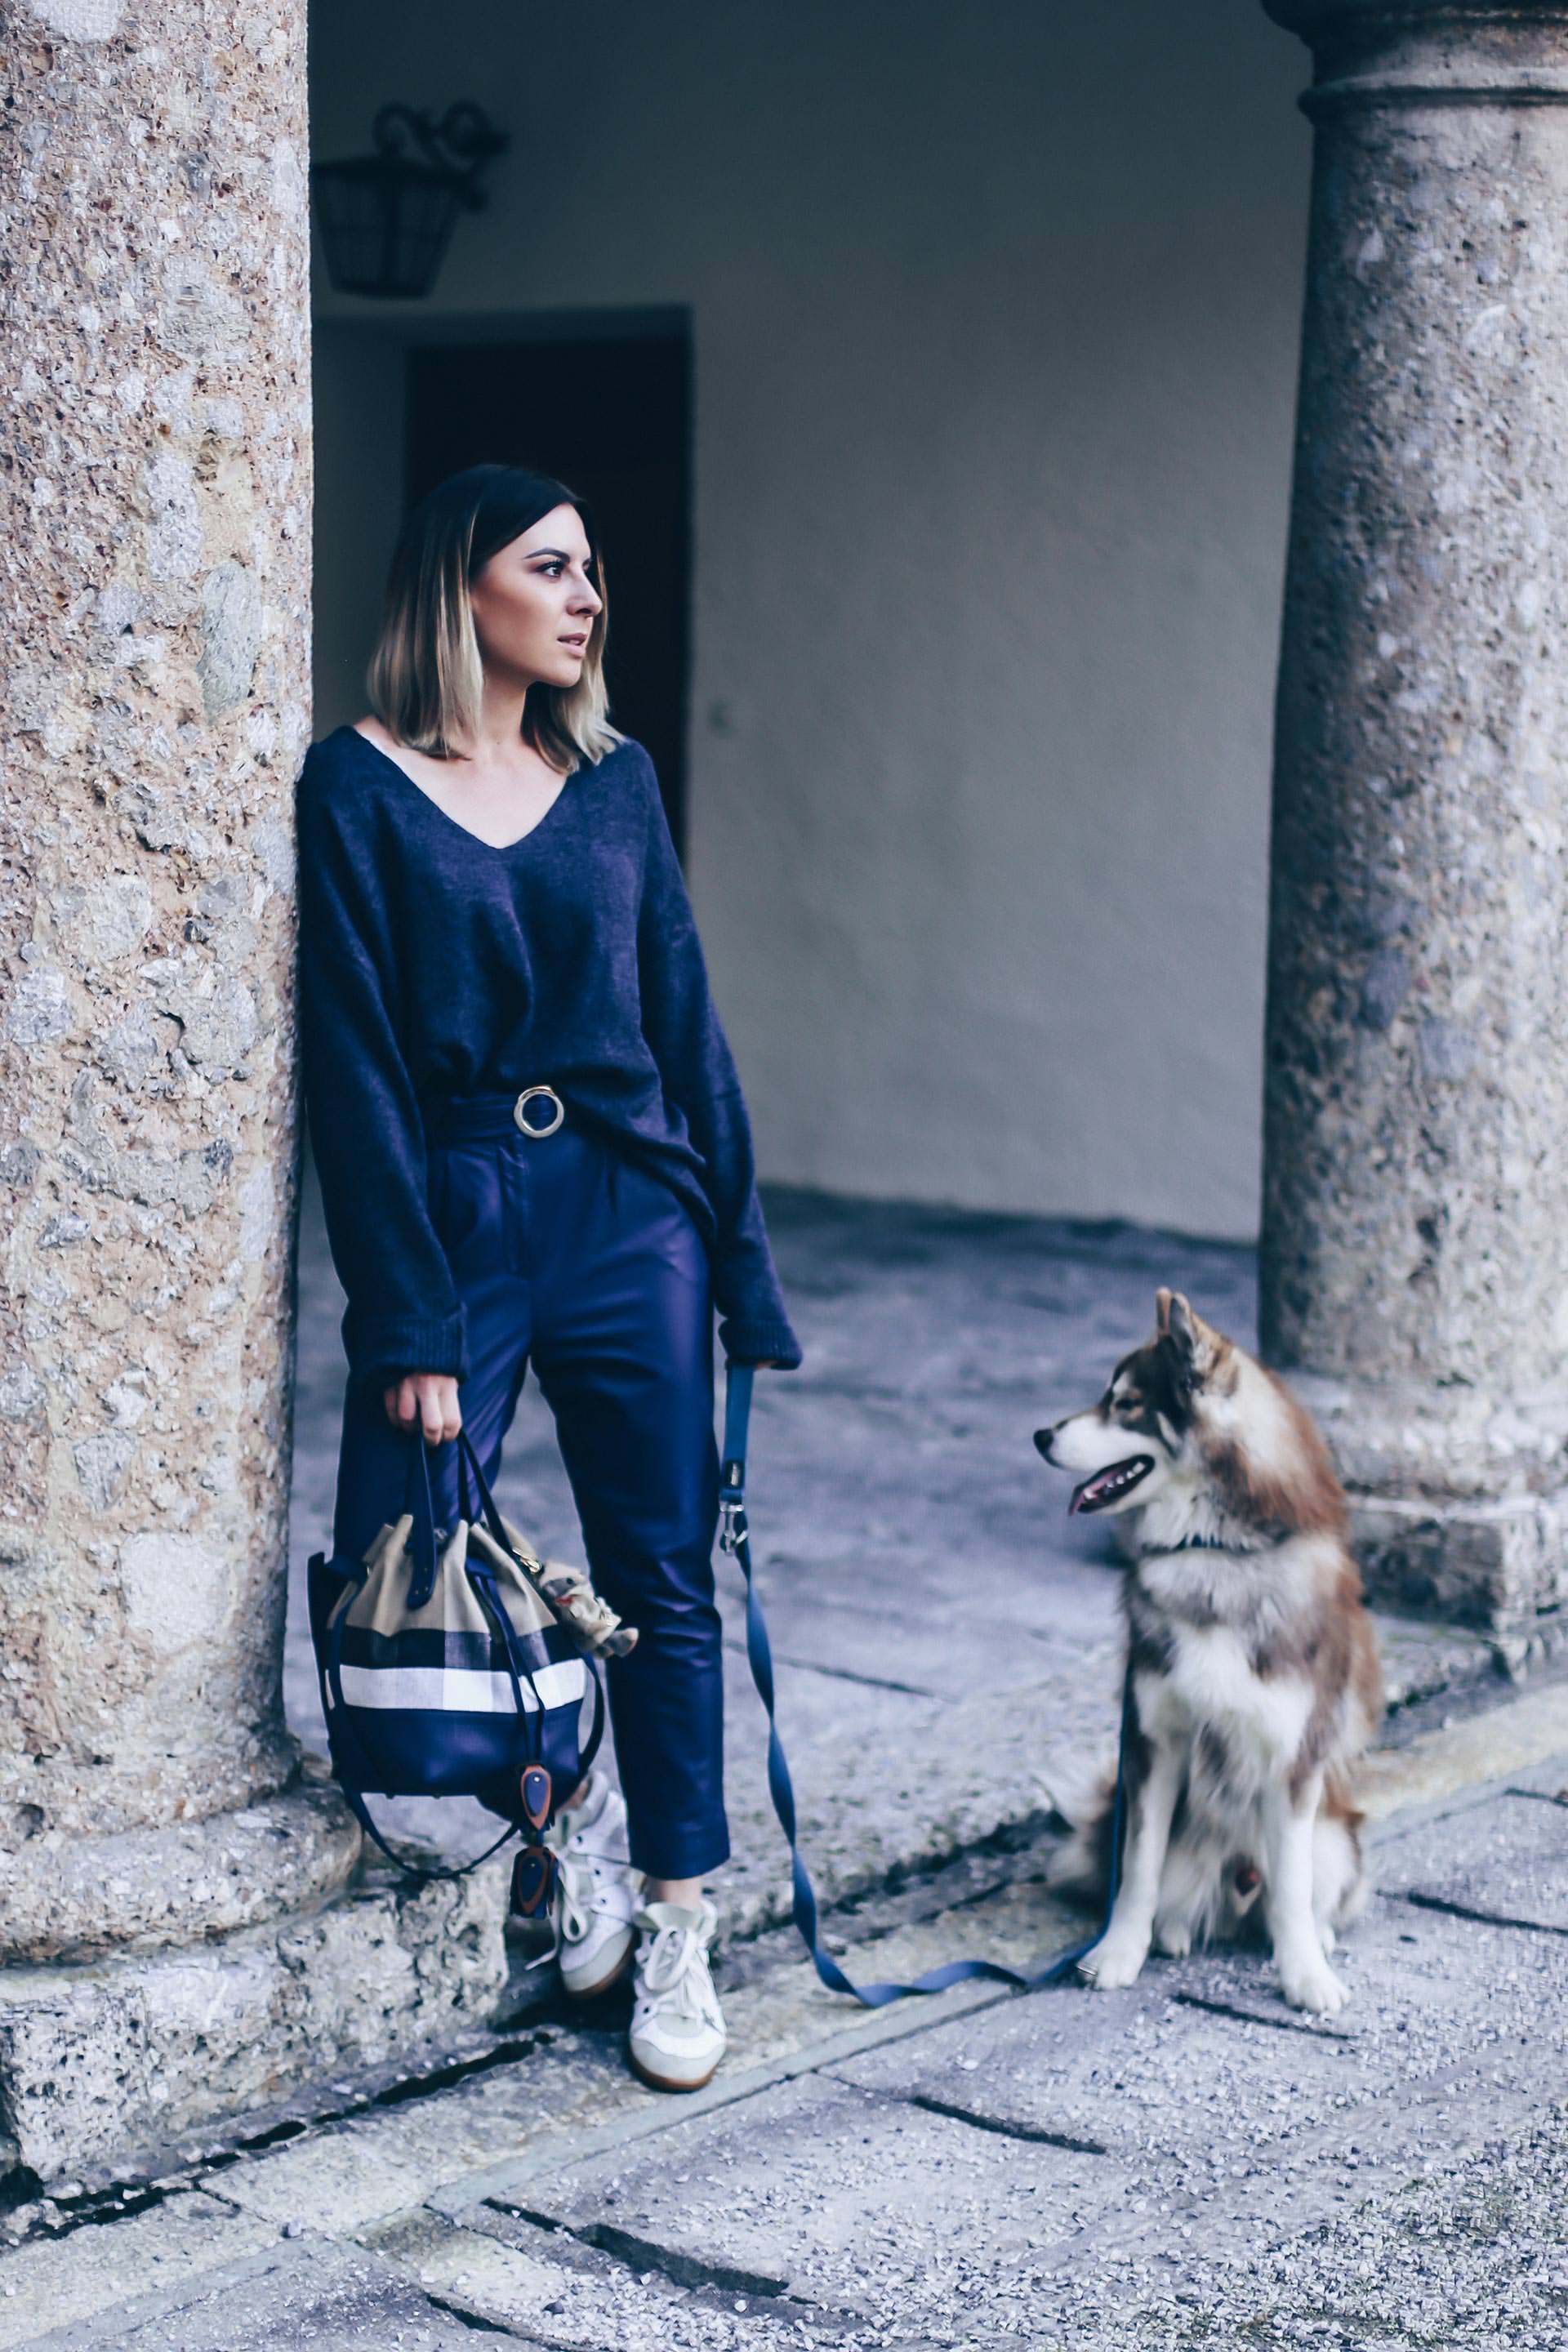 Dunkelblau kombinieren, Casual Chic Styling mit Isabel Marant Bobby Sneaker Wedges, oversize Strickpullover und Burberry Beuteltasche, Herbst Outfit, Herbst Trends 2017, Fashion Blog, Modeblog, Outfit of the Day, www.whoismocca.com